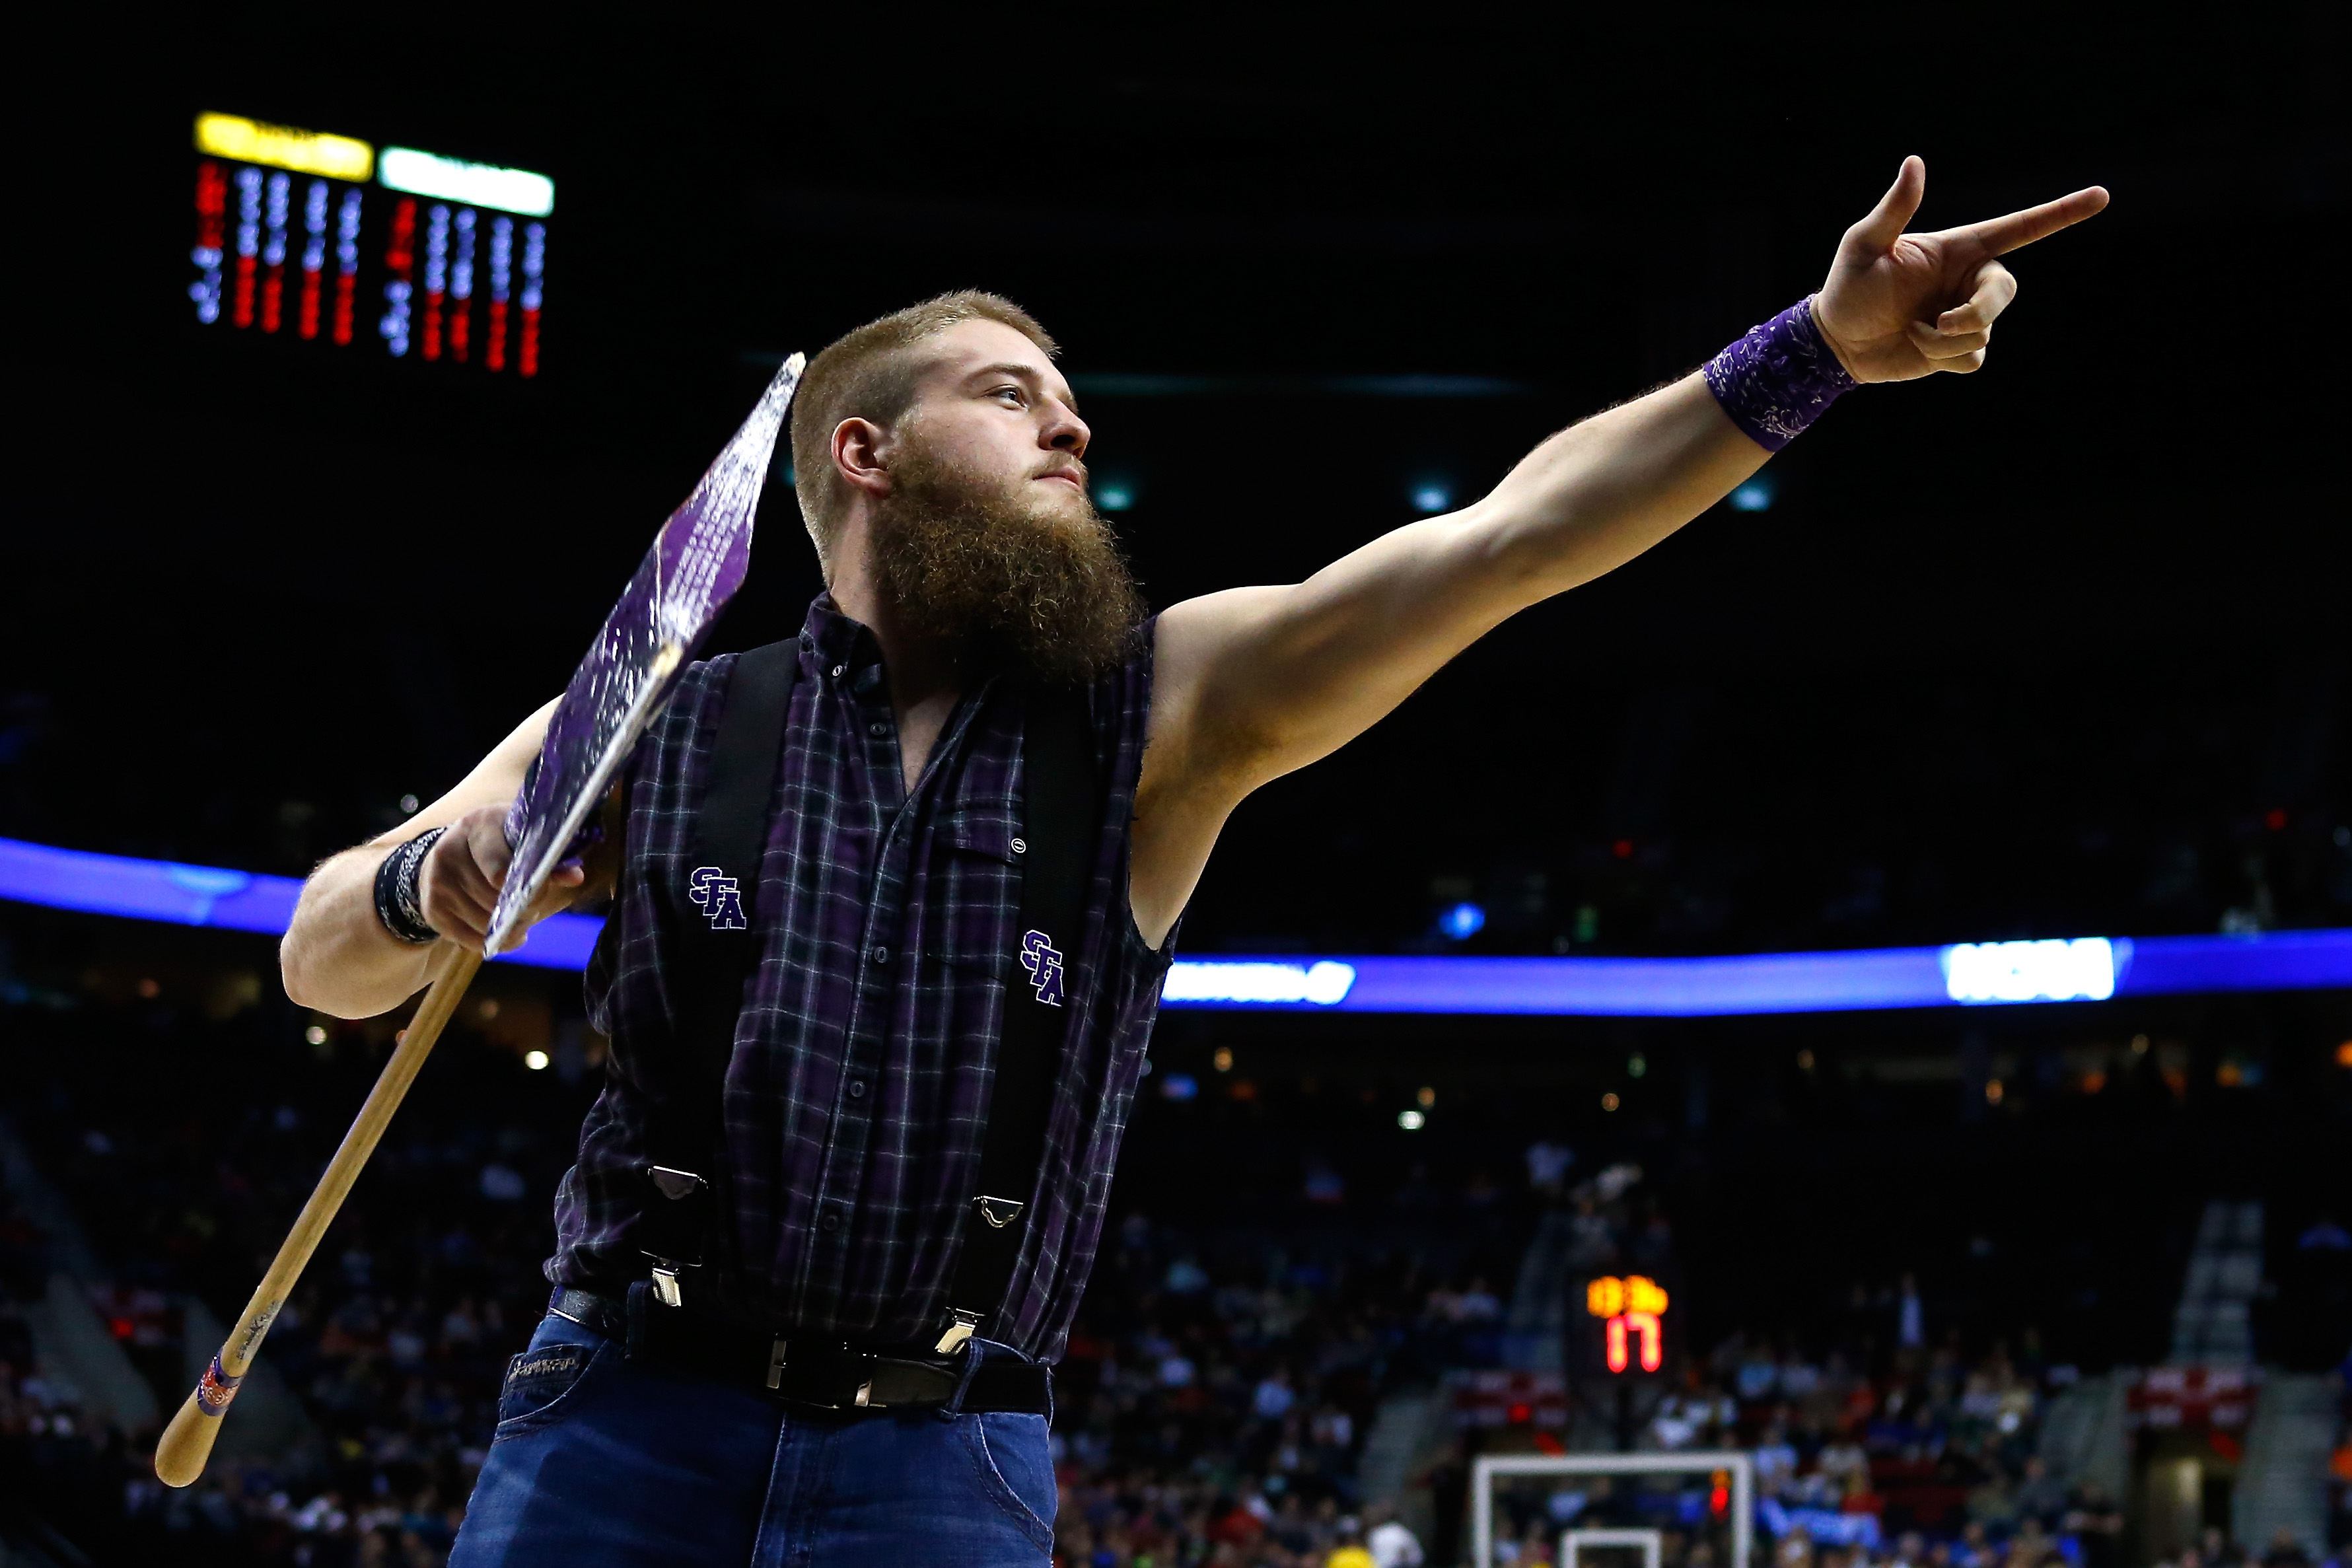 The Stephen F. Austin Lumberjacks mascot performs during the second half. (Getty)